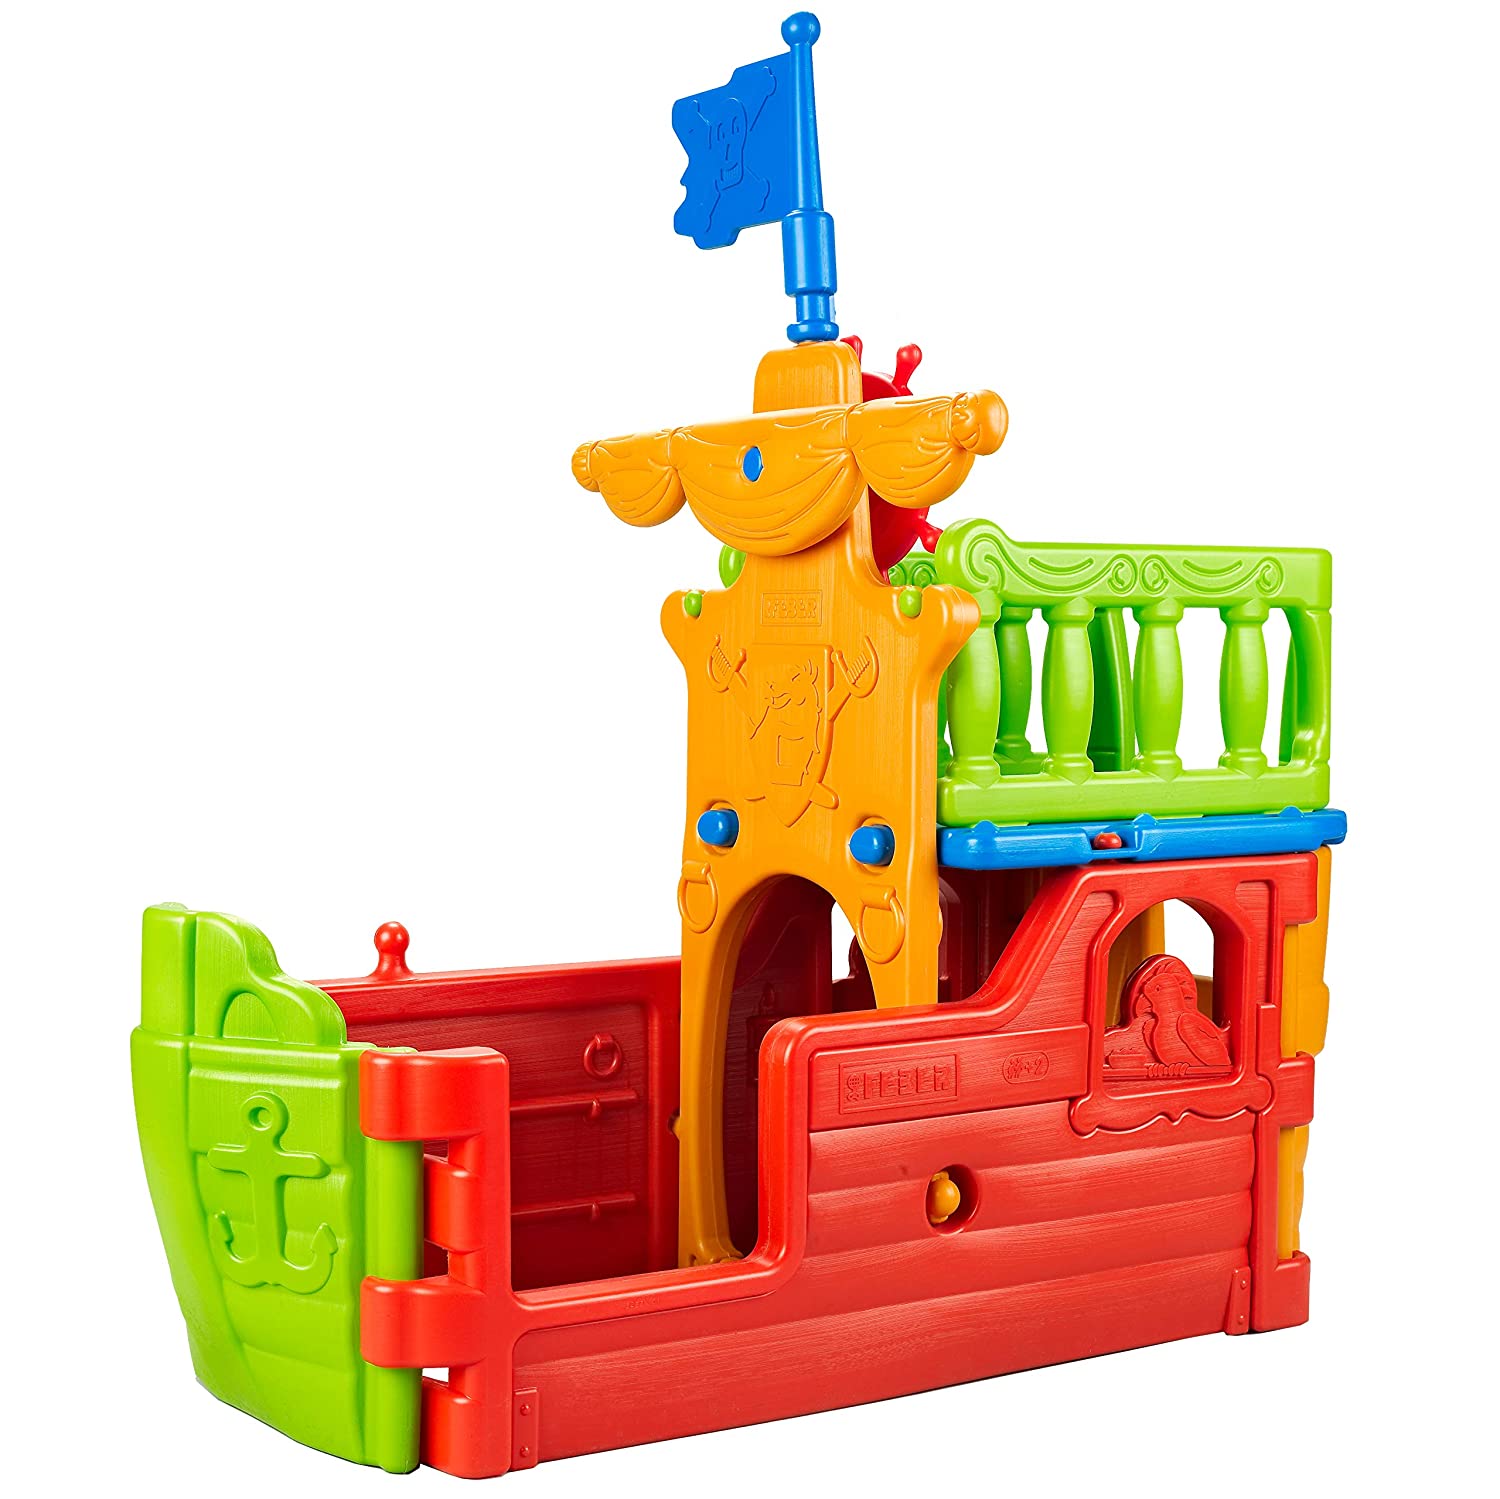 Buccaneer Pirate Play Boat 